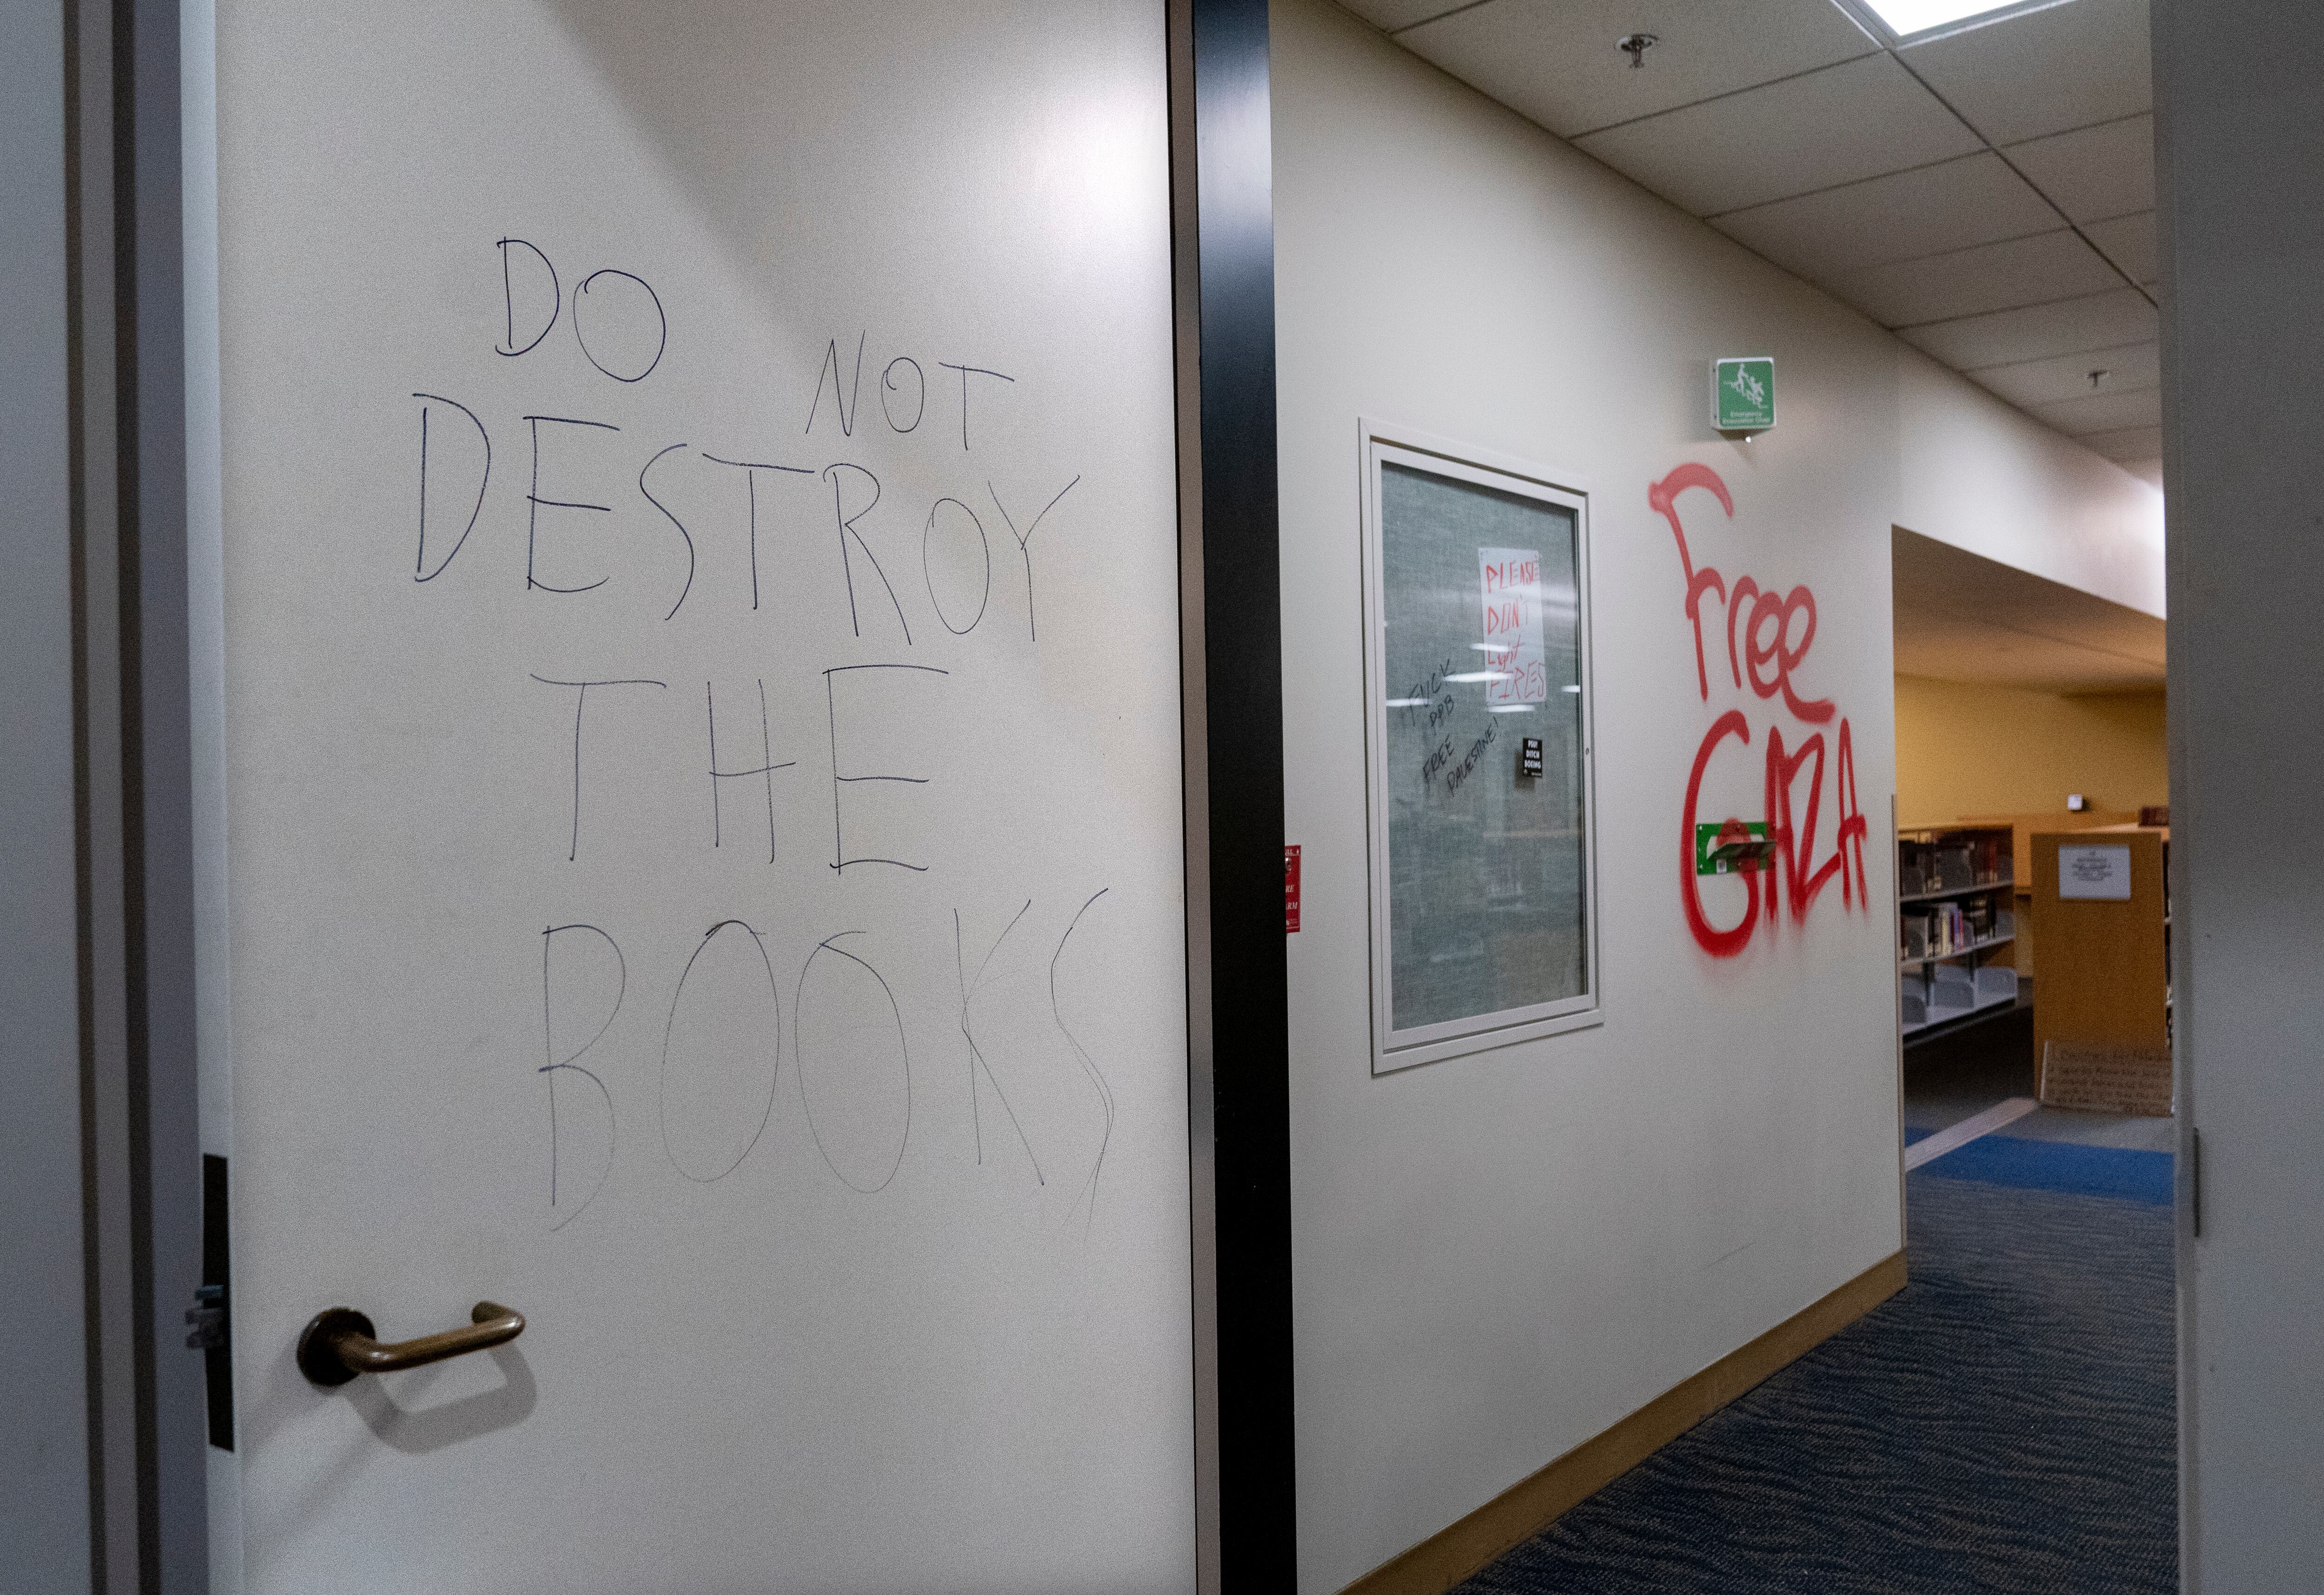 Graffiti asking occupants to protect the archives and book areas.